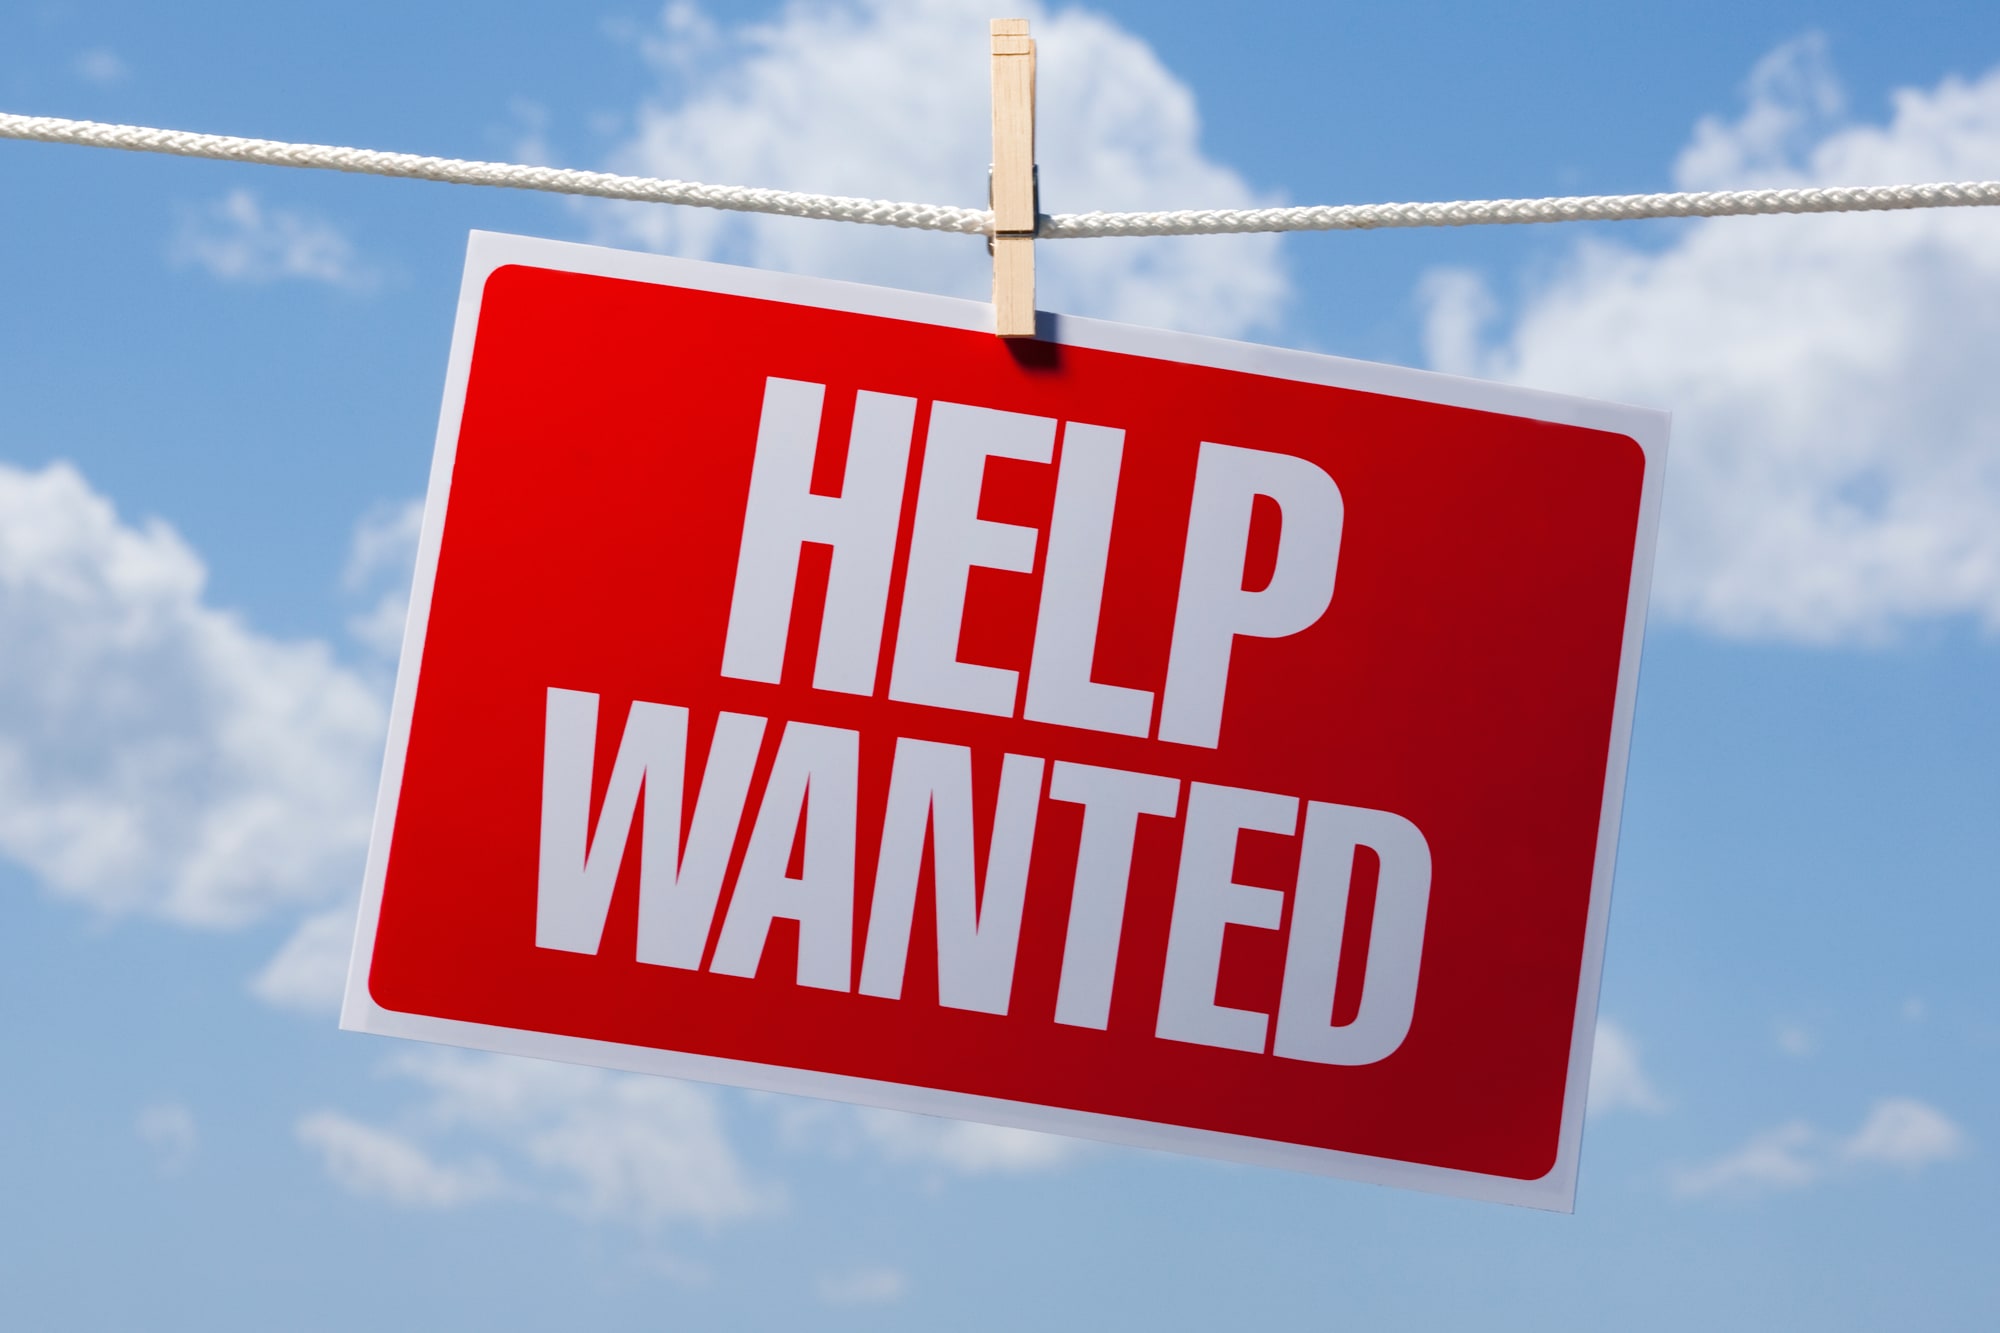 Help wanted: Top 10 US cities for job seekers